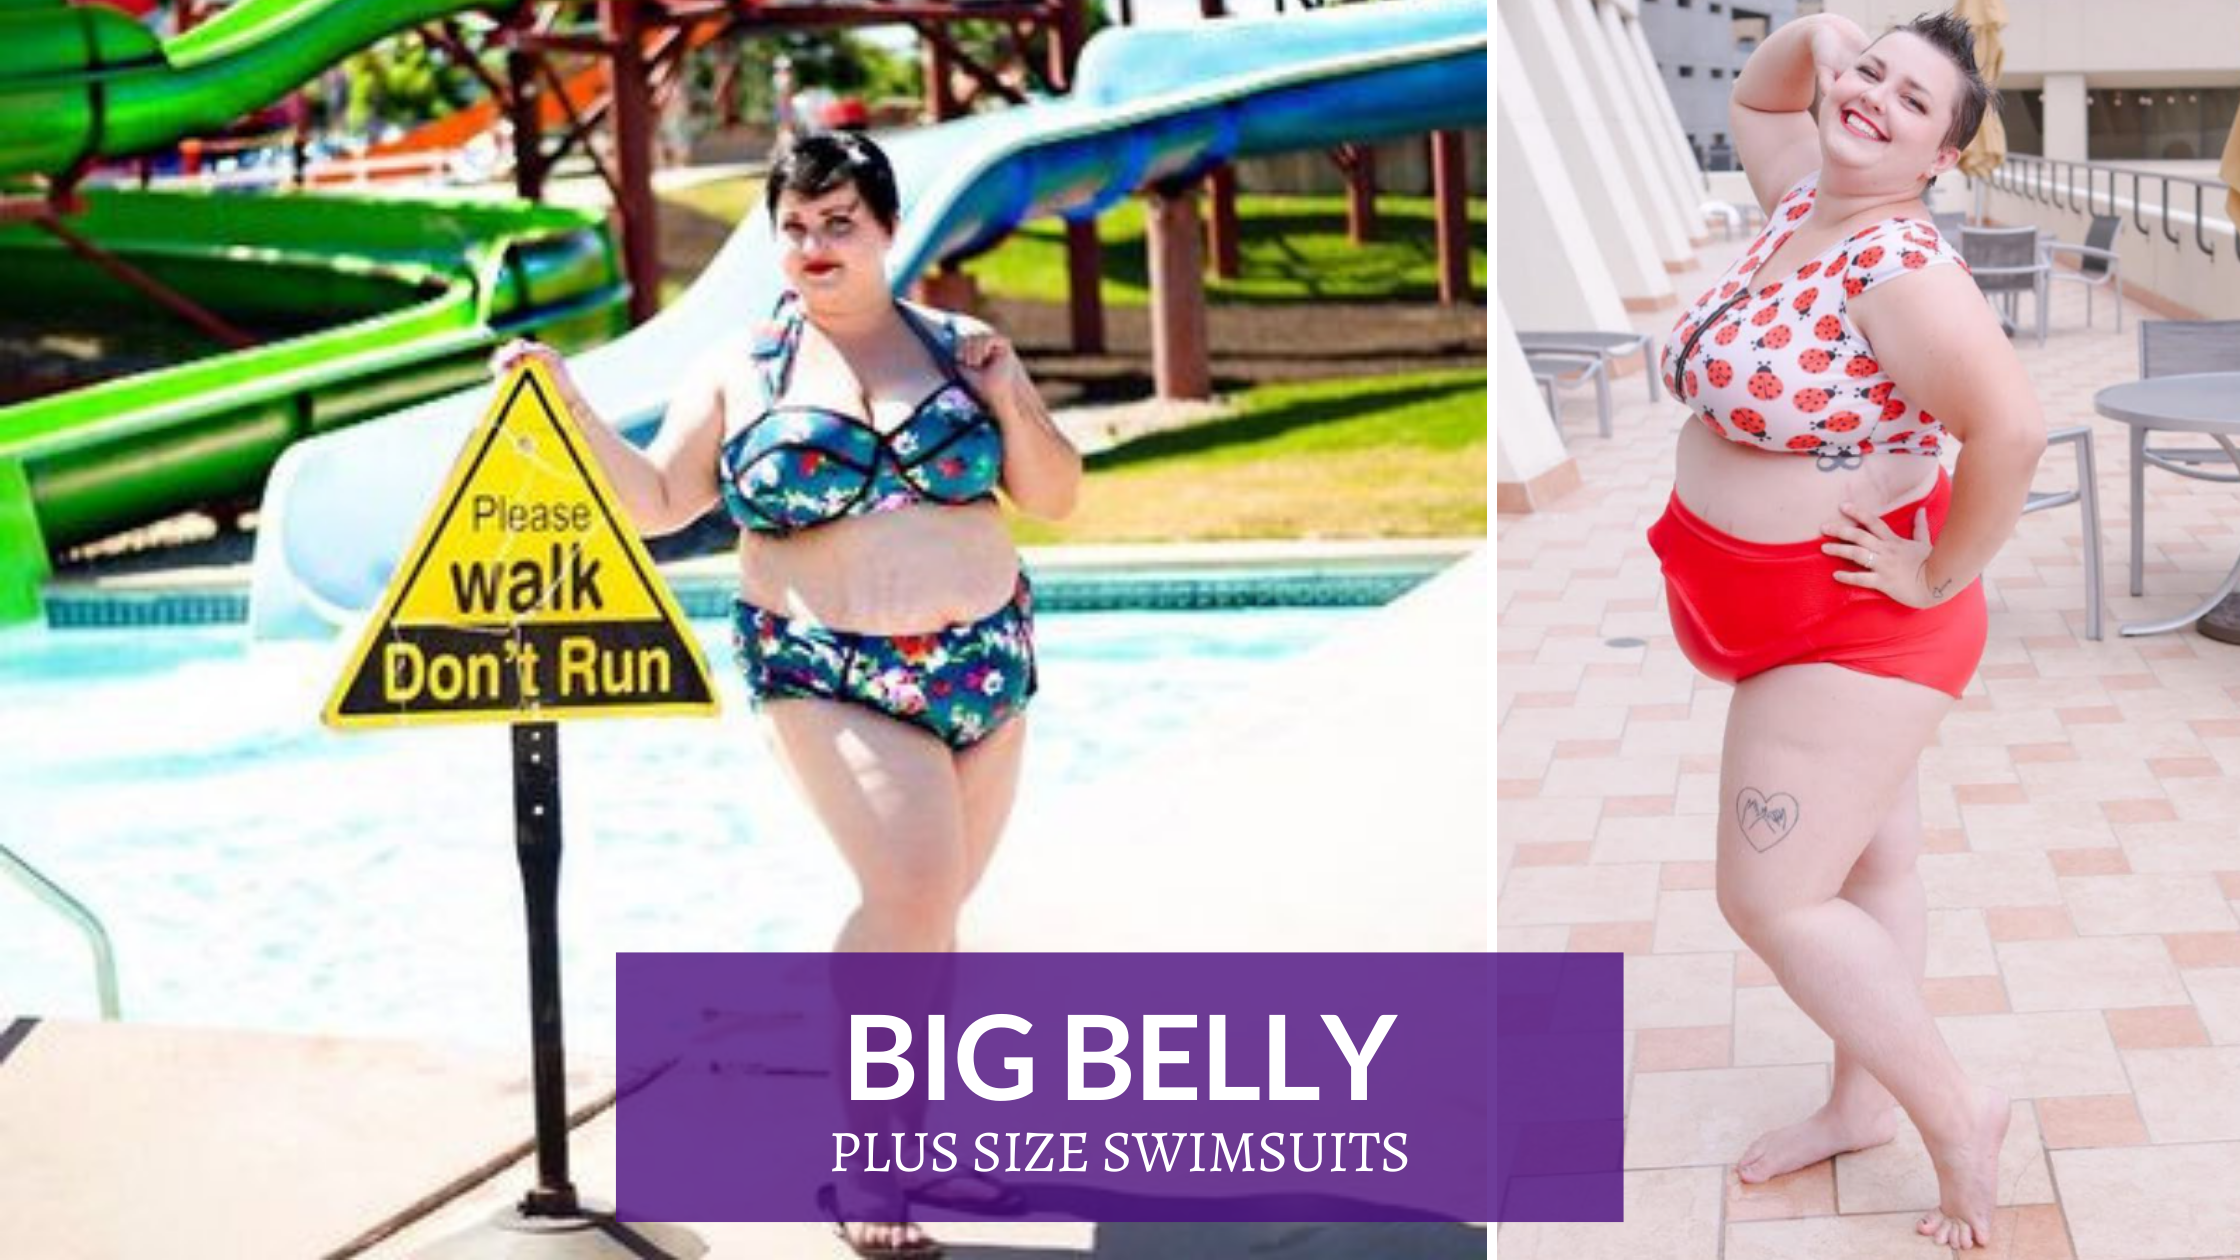 akshay swami recommends chubby women in bathing suits pic